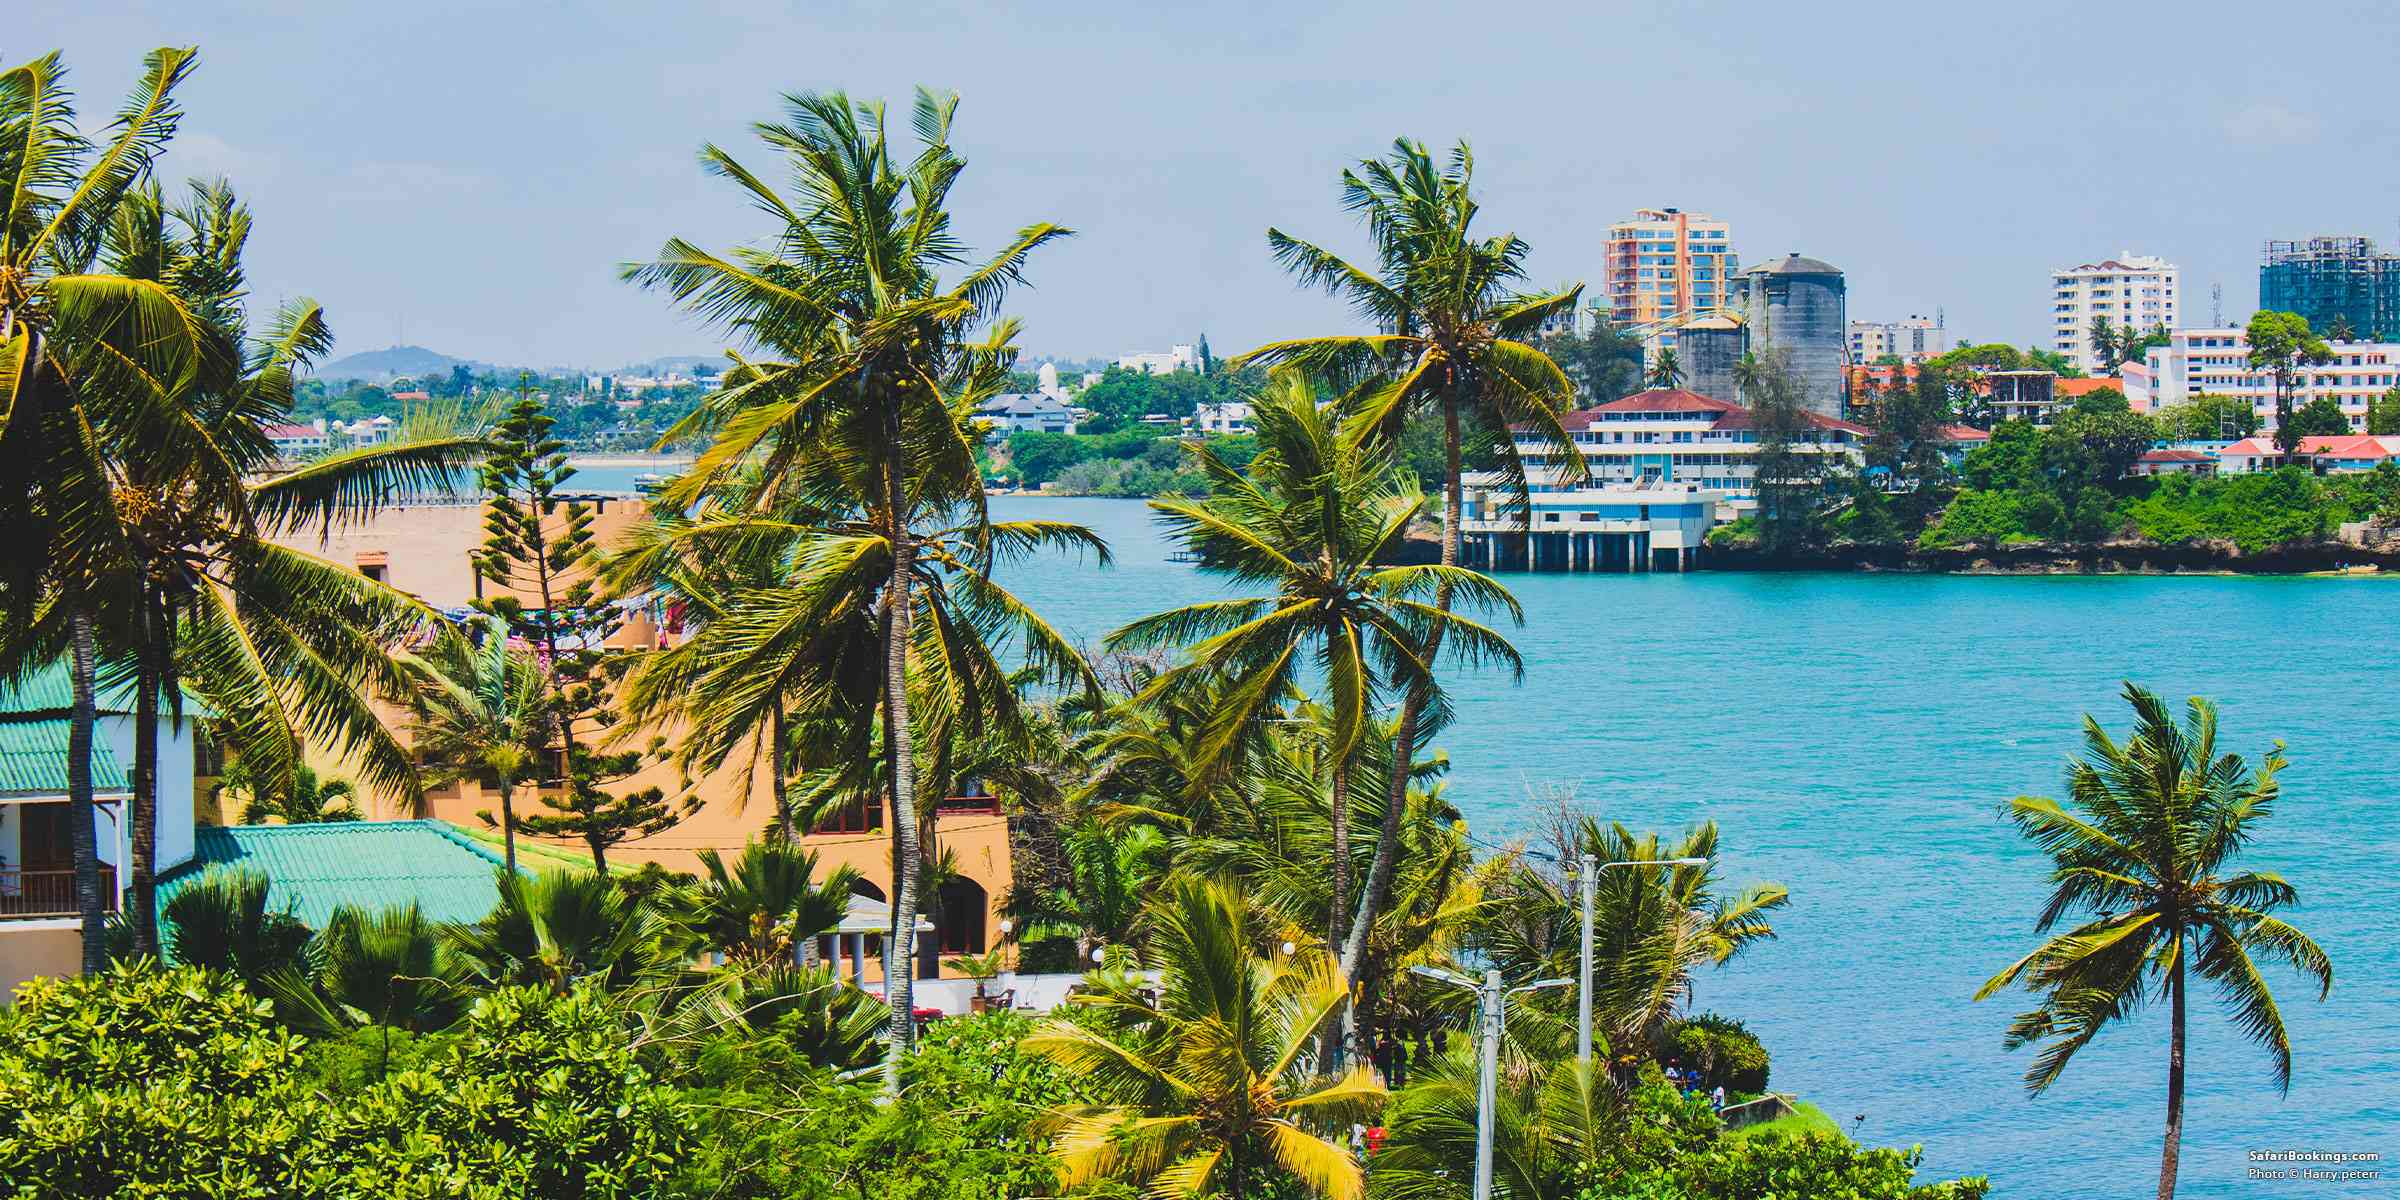 Best Places & Tourist Attractions To Visit in and Around Mombasa